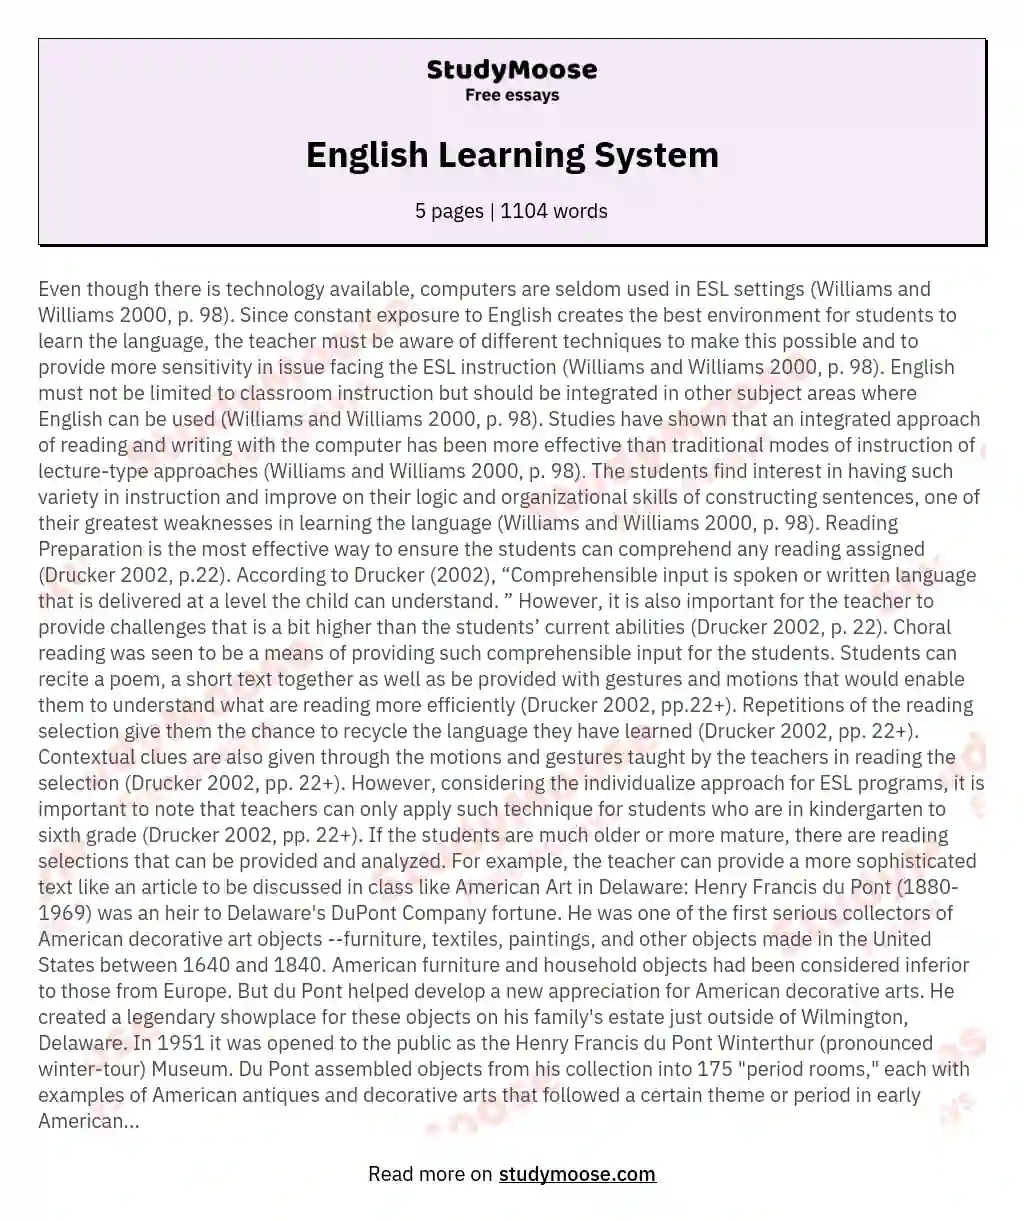 English Learning System essay